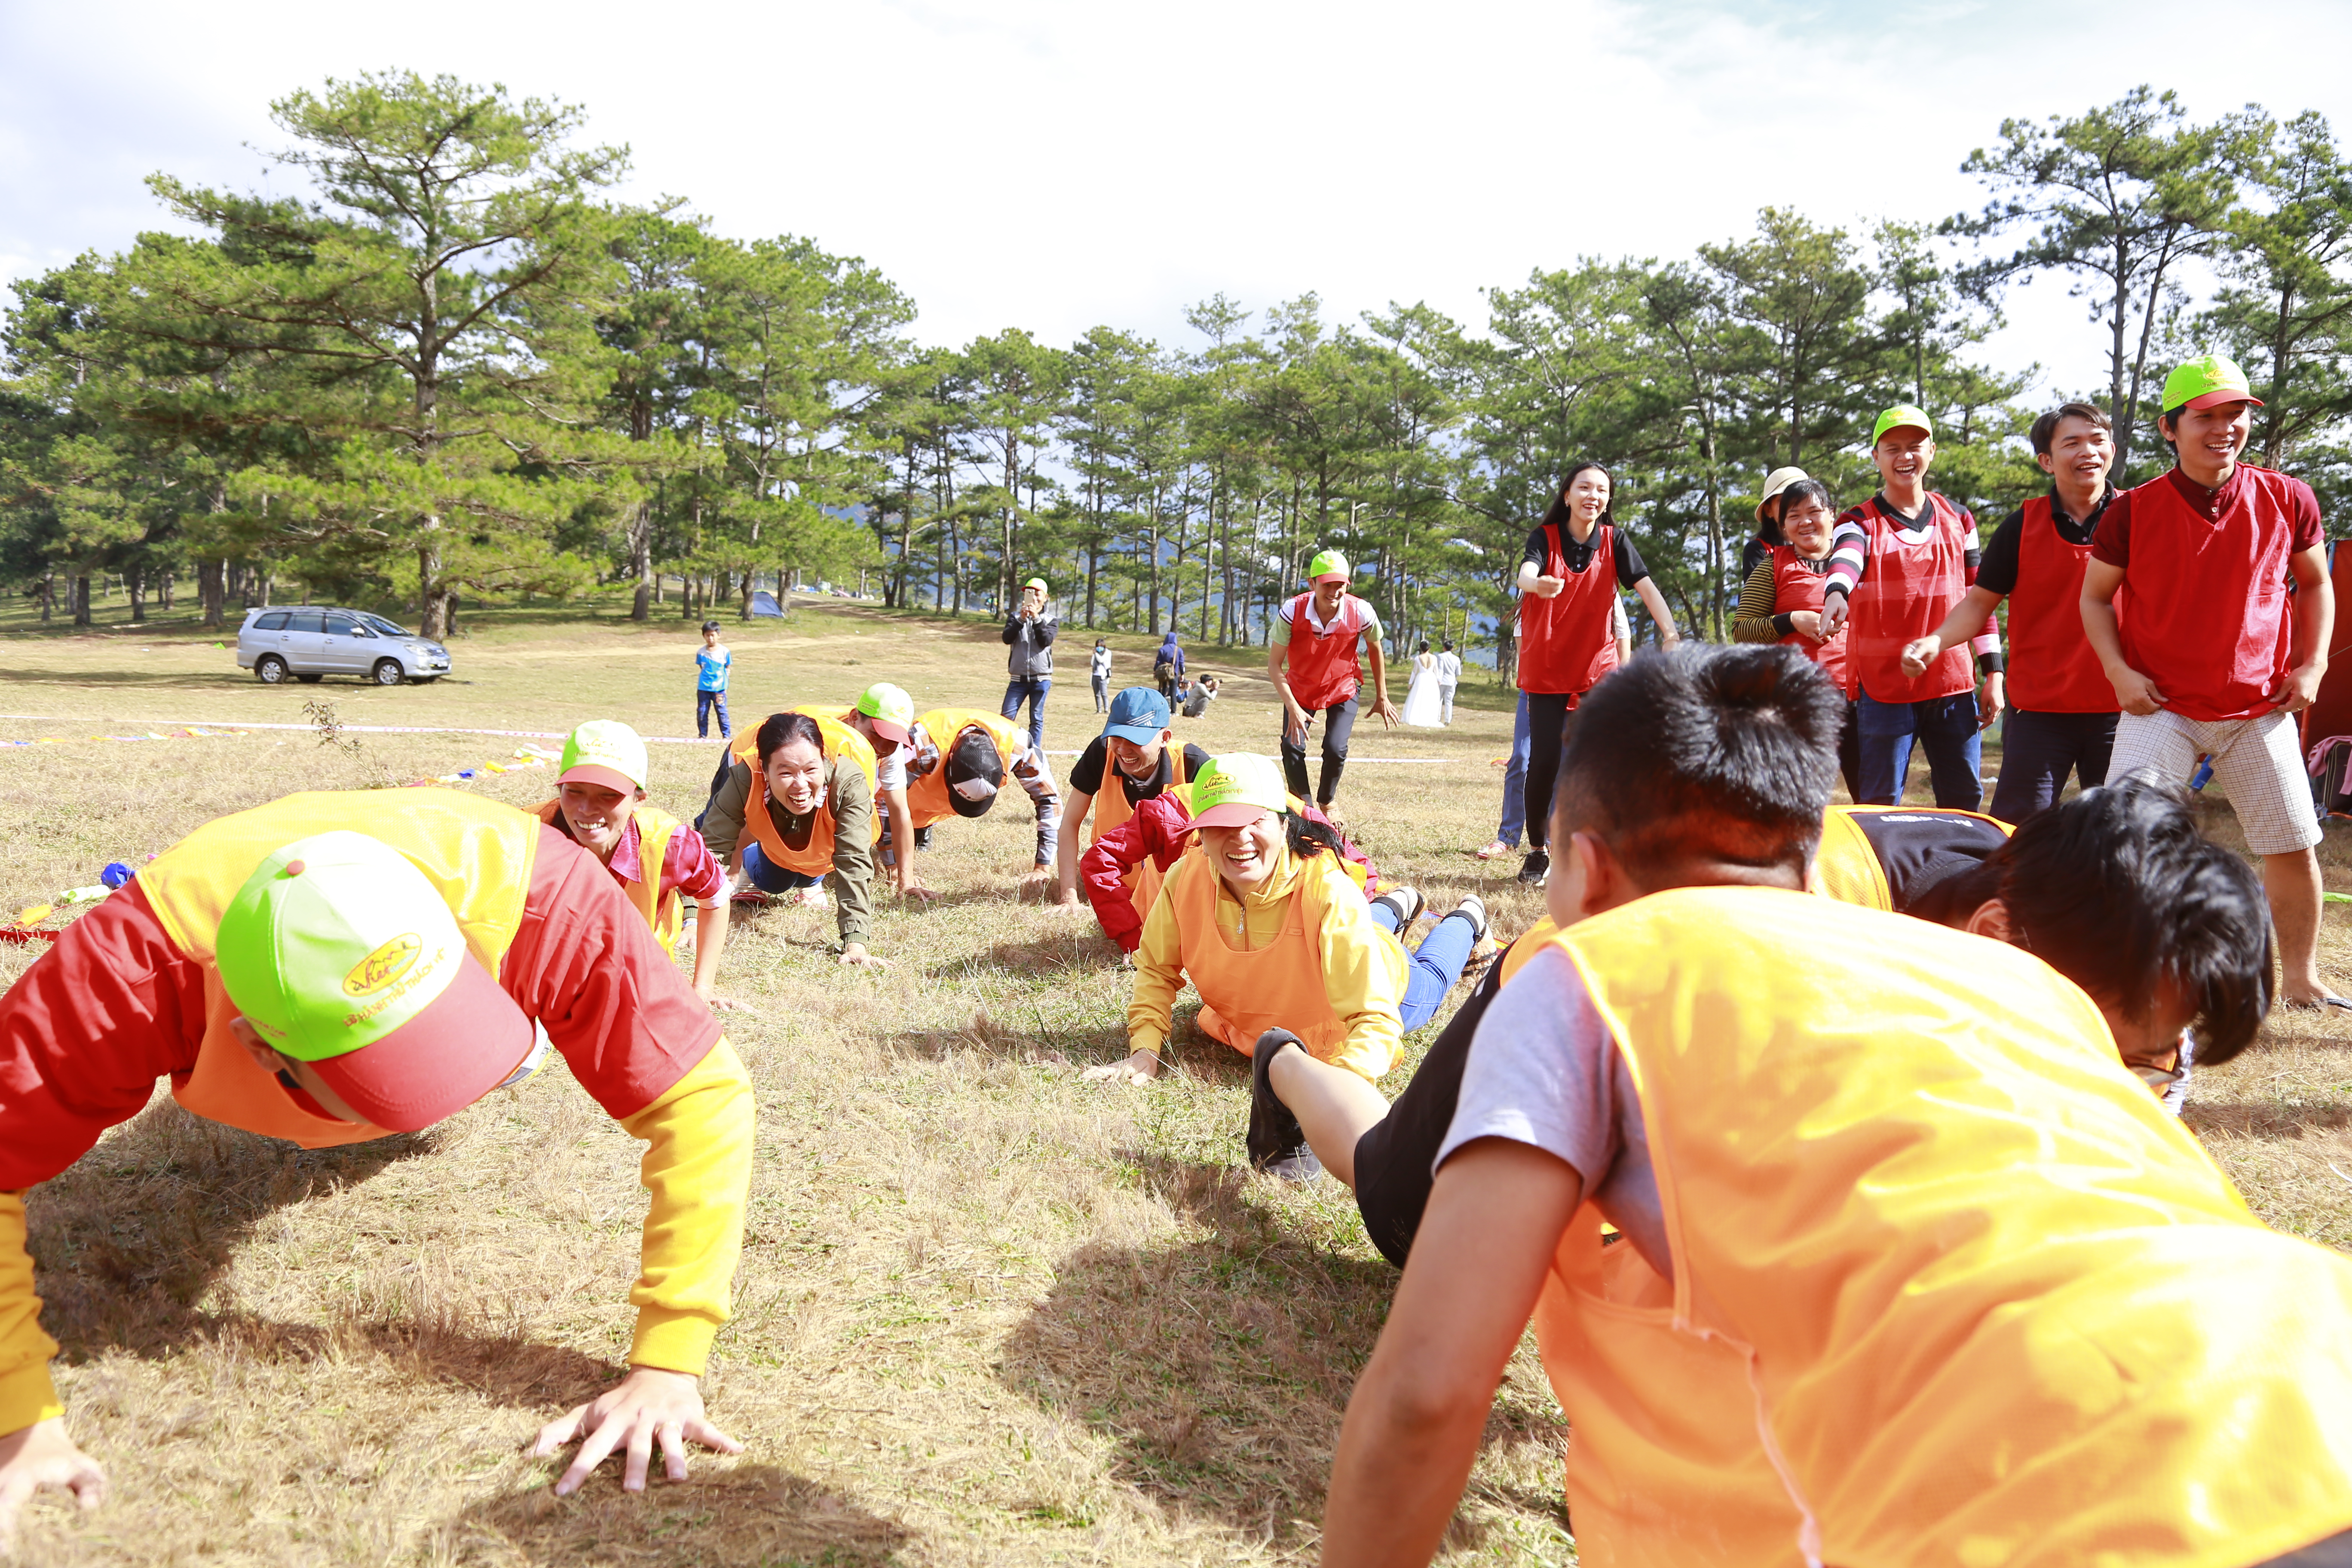 The team building trip provides outdoor exercises that improve health of workers, especially white collar workers